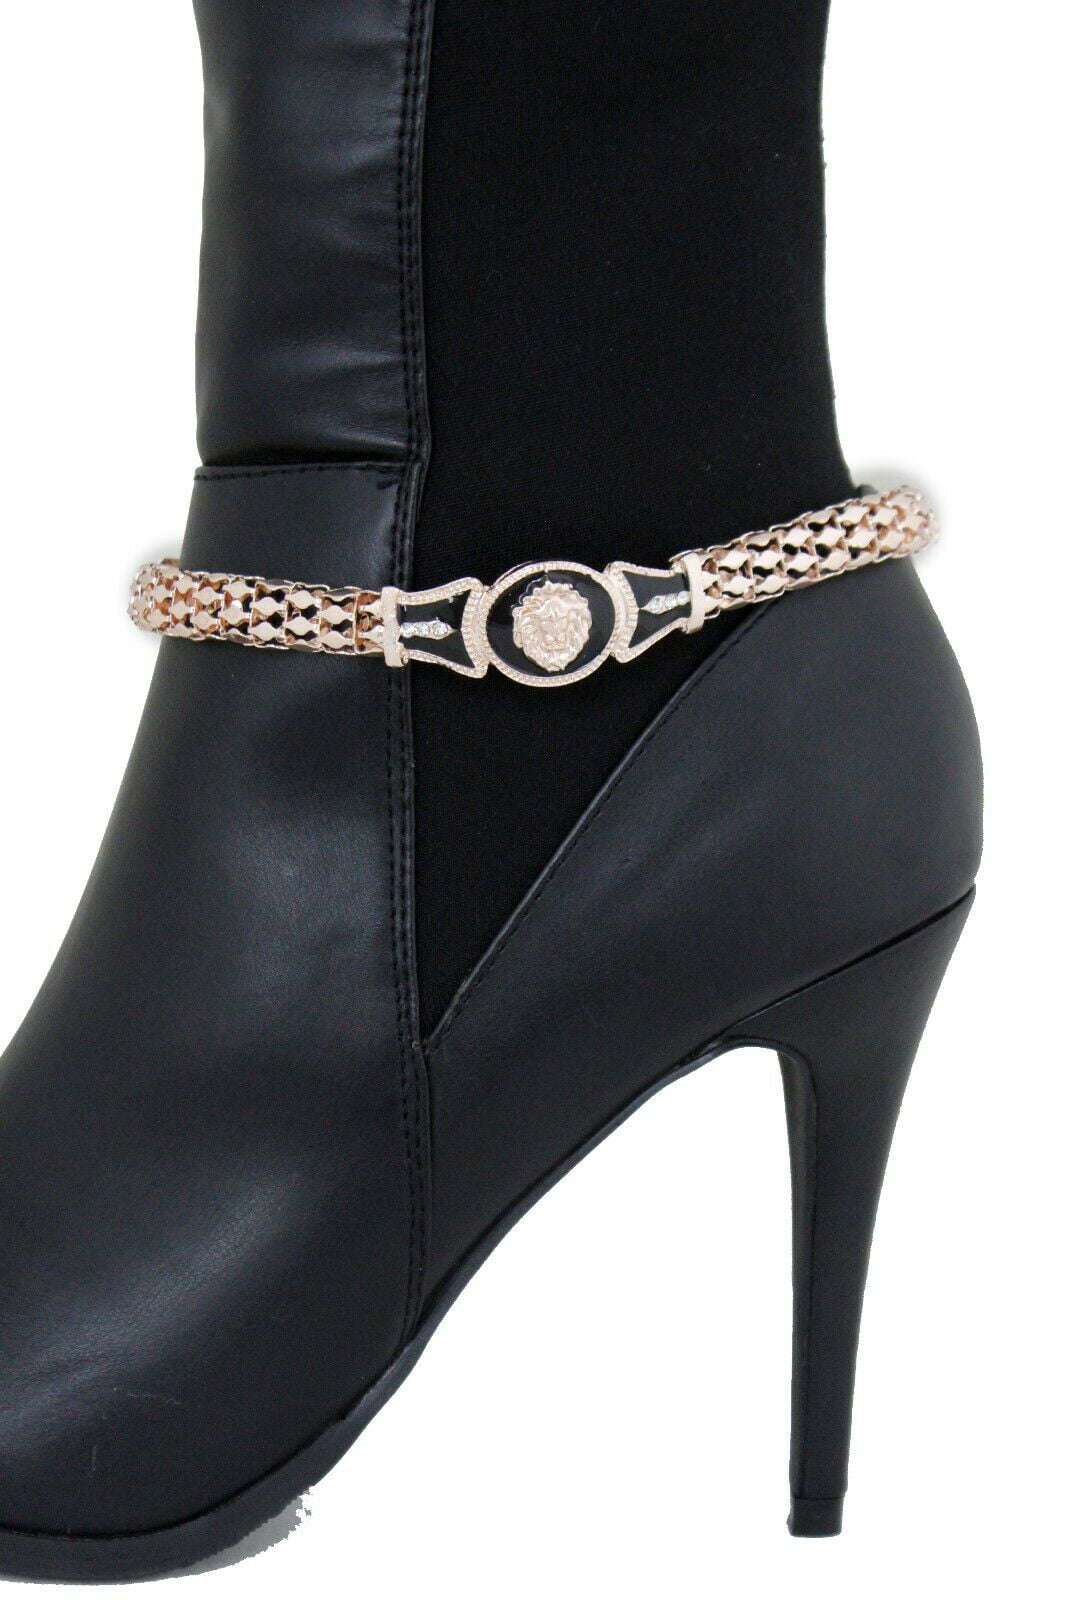 Women Silver Metal Chains Boot Bracelet Anklet Shoe Charm Jewelry Strands Ring 